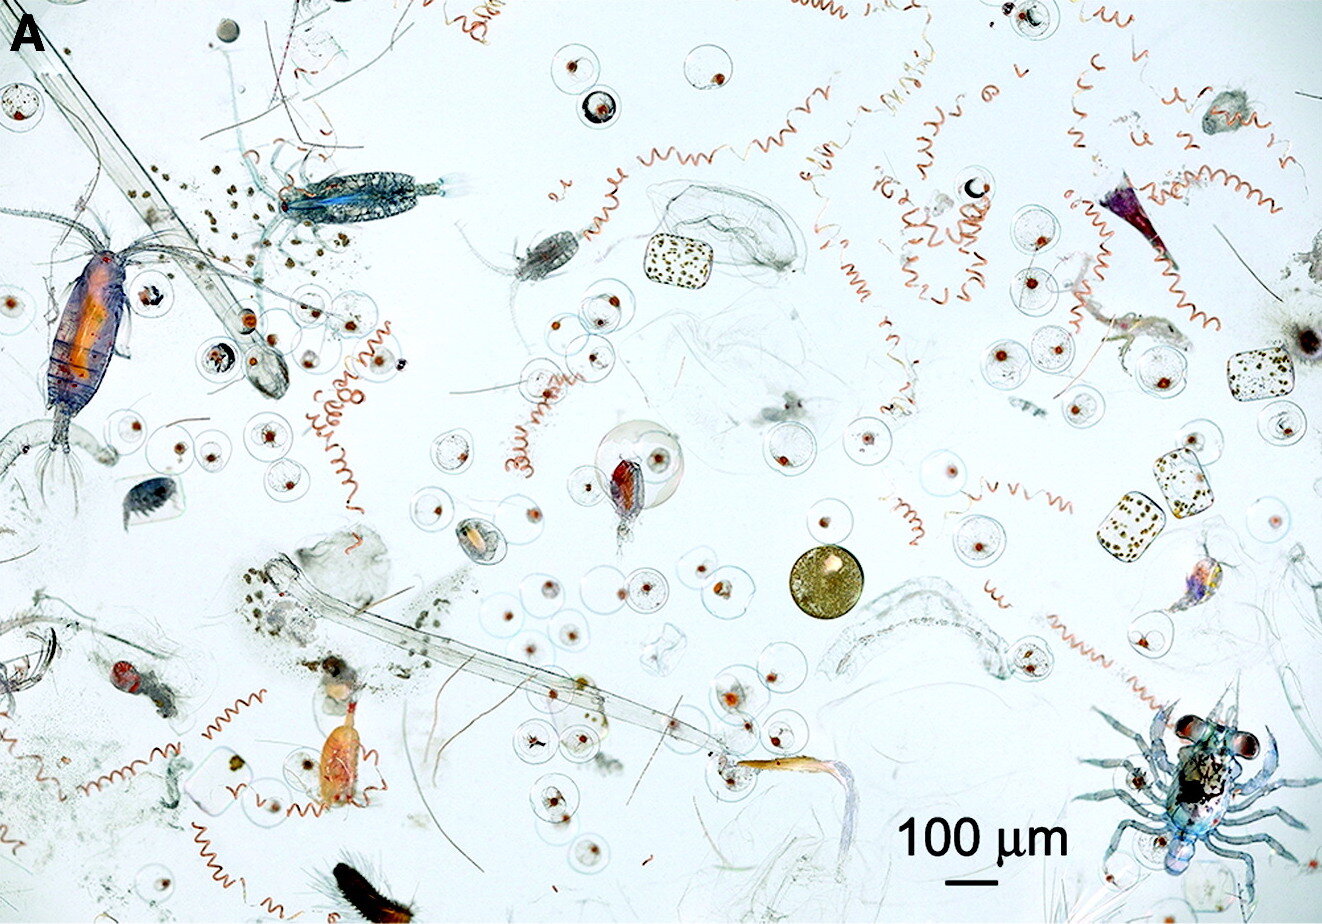 Marine plankton tell the long story of ocean health, and maybe human too